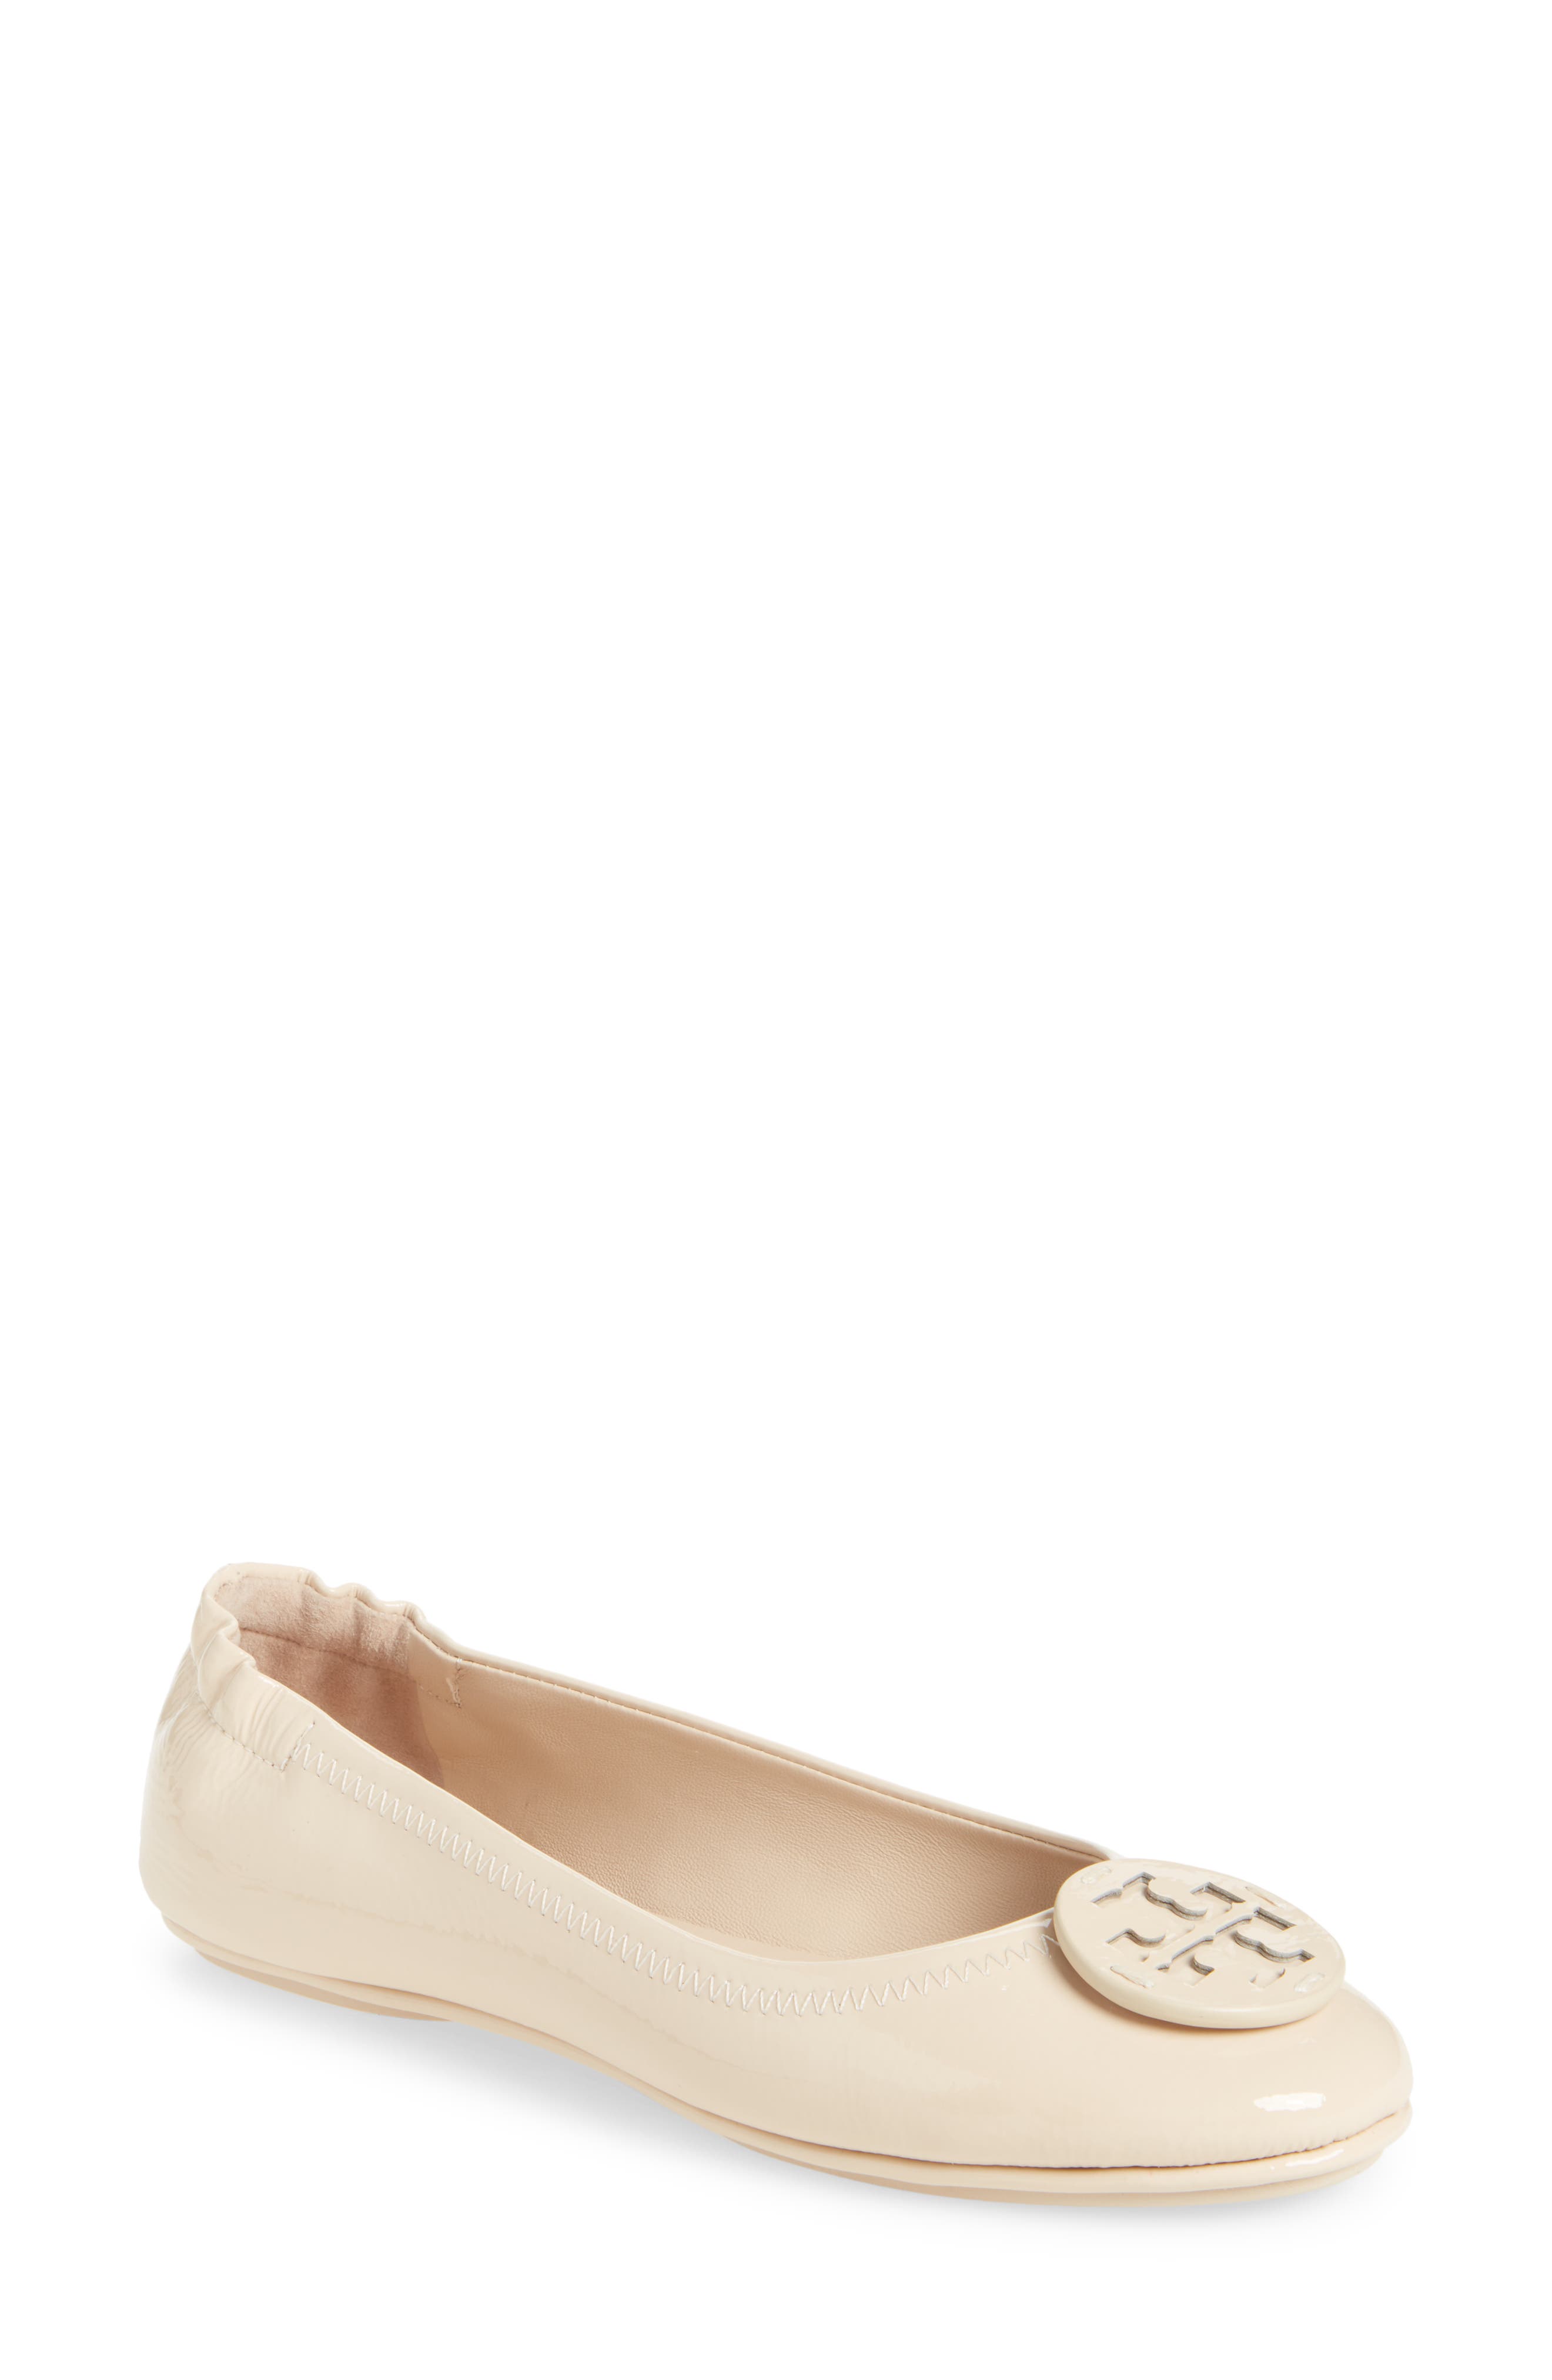 nude colored flats